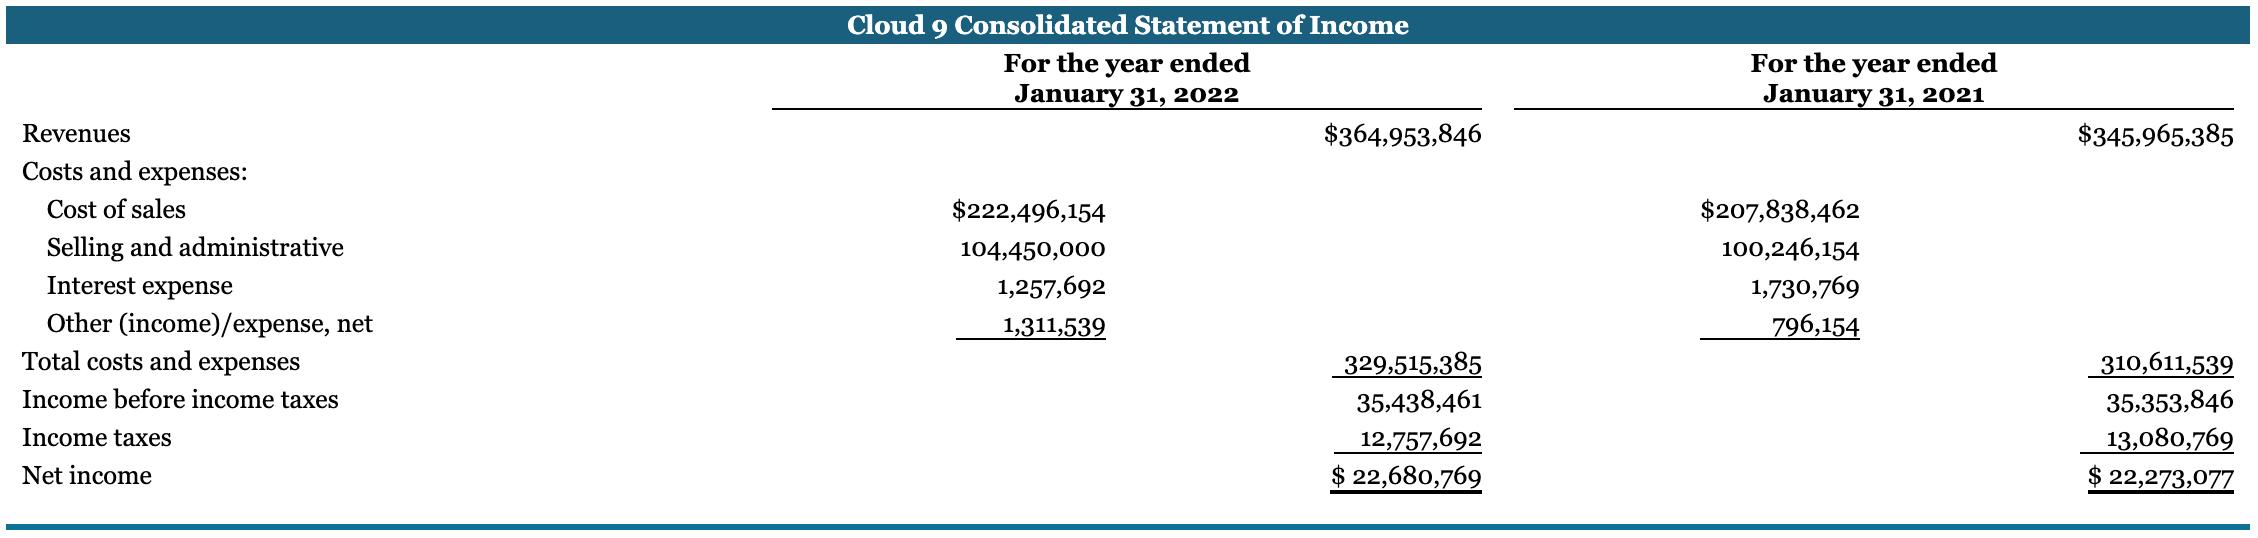 Cloud 9 Consolidated Statement of Income For the year ended January 31, 2022 $364,953,846 For the year ended January 31, 2021